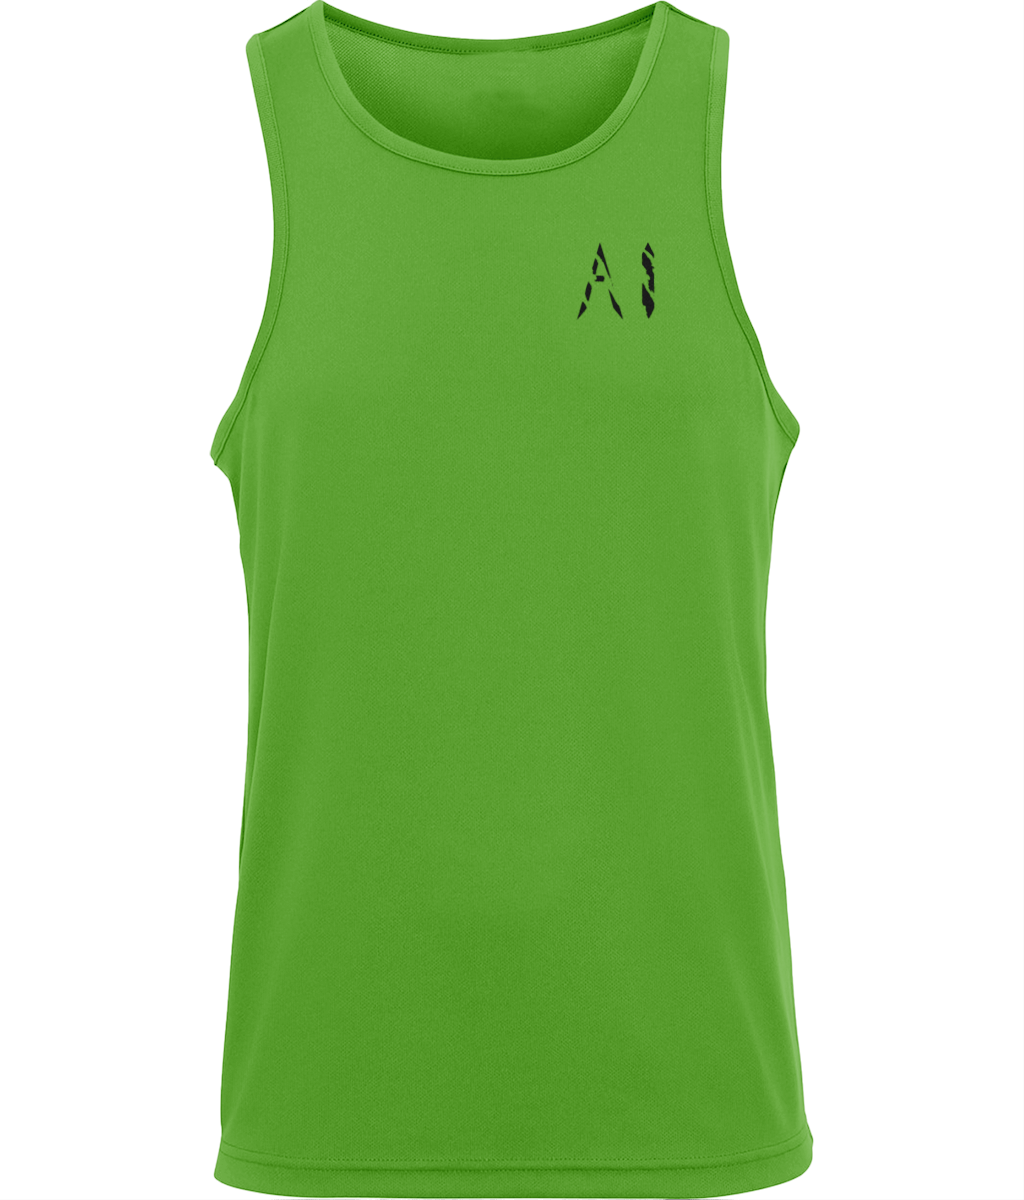 Mens lime green Workout Sports Vest with black AI logo written on the left chest